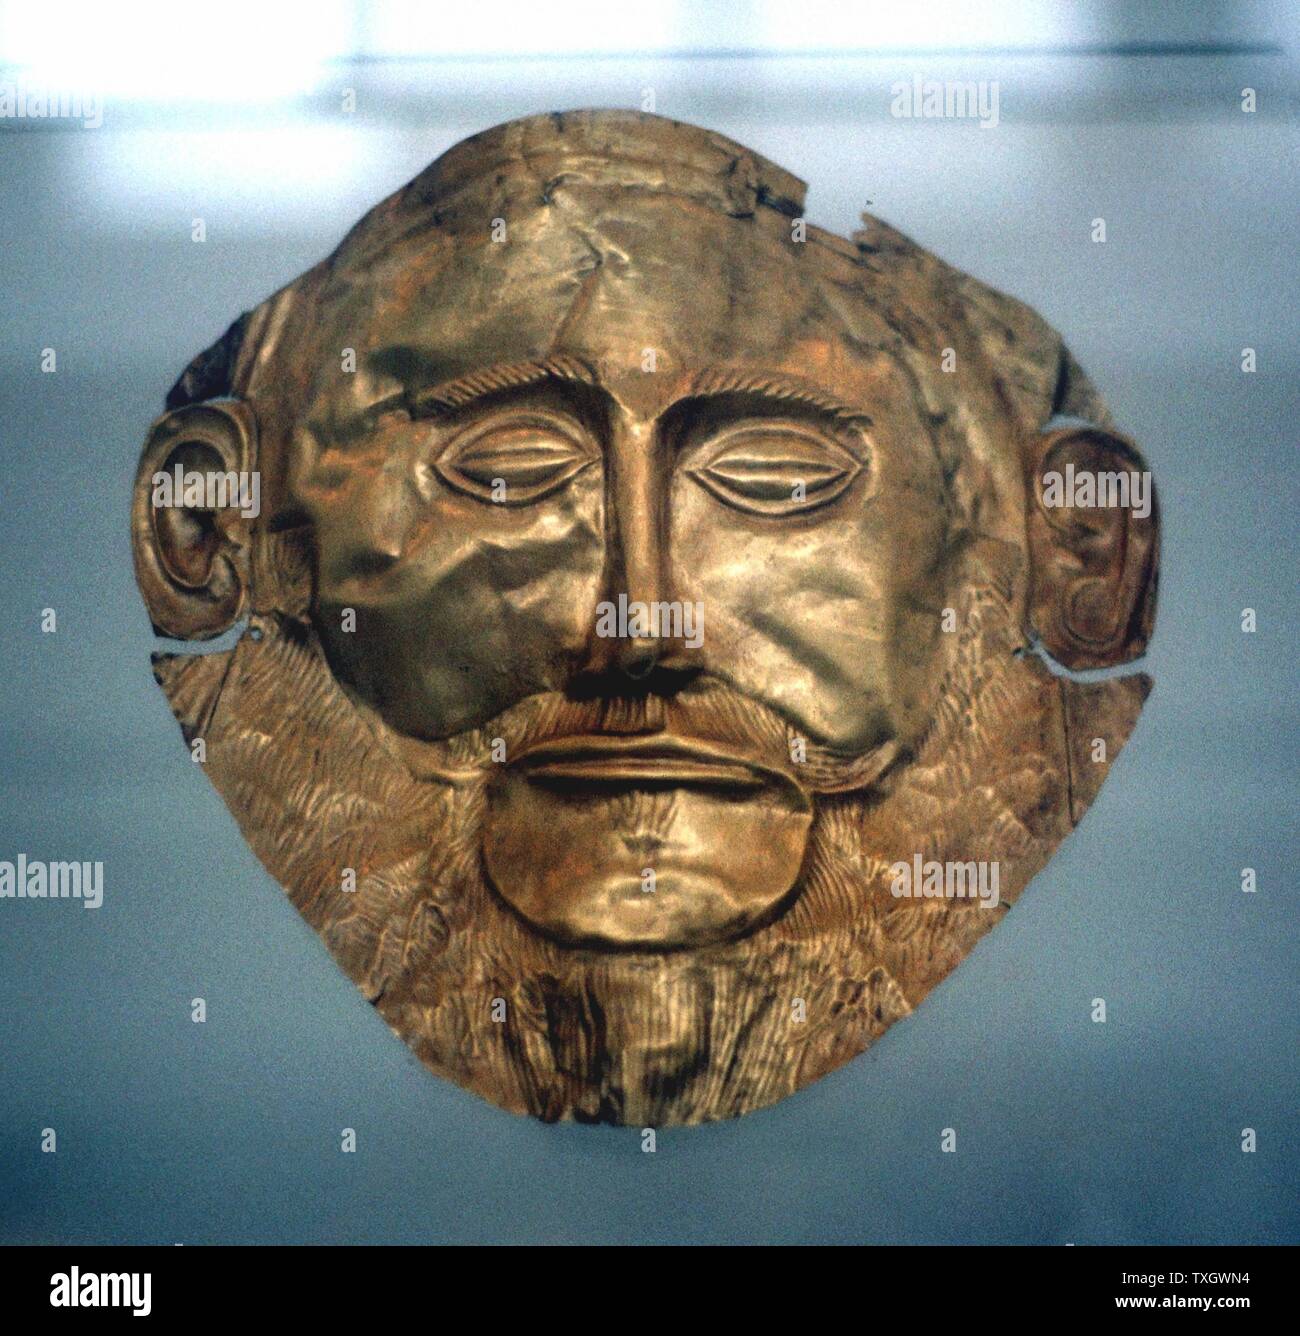 Agamemnon, legendary king of Mycenae and leader of the punitive Greek expedition against Troy Gold funerary mask, c1600-1500 BC reputed to be that of Agamemnon Mycenae Stock Photo